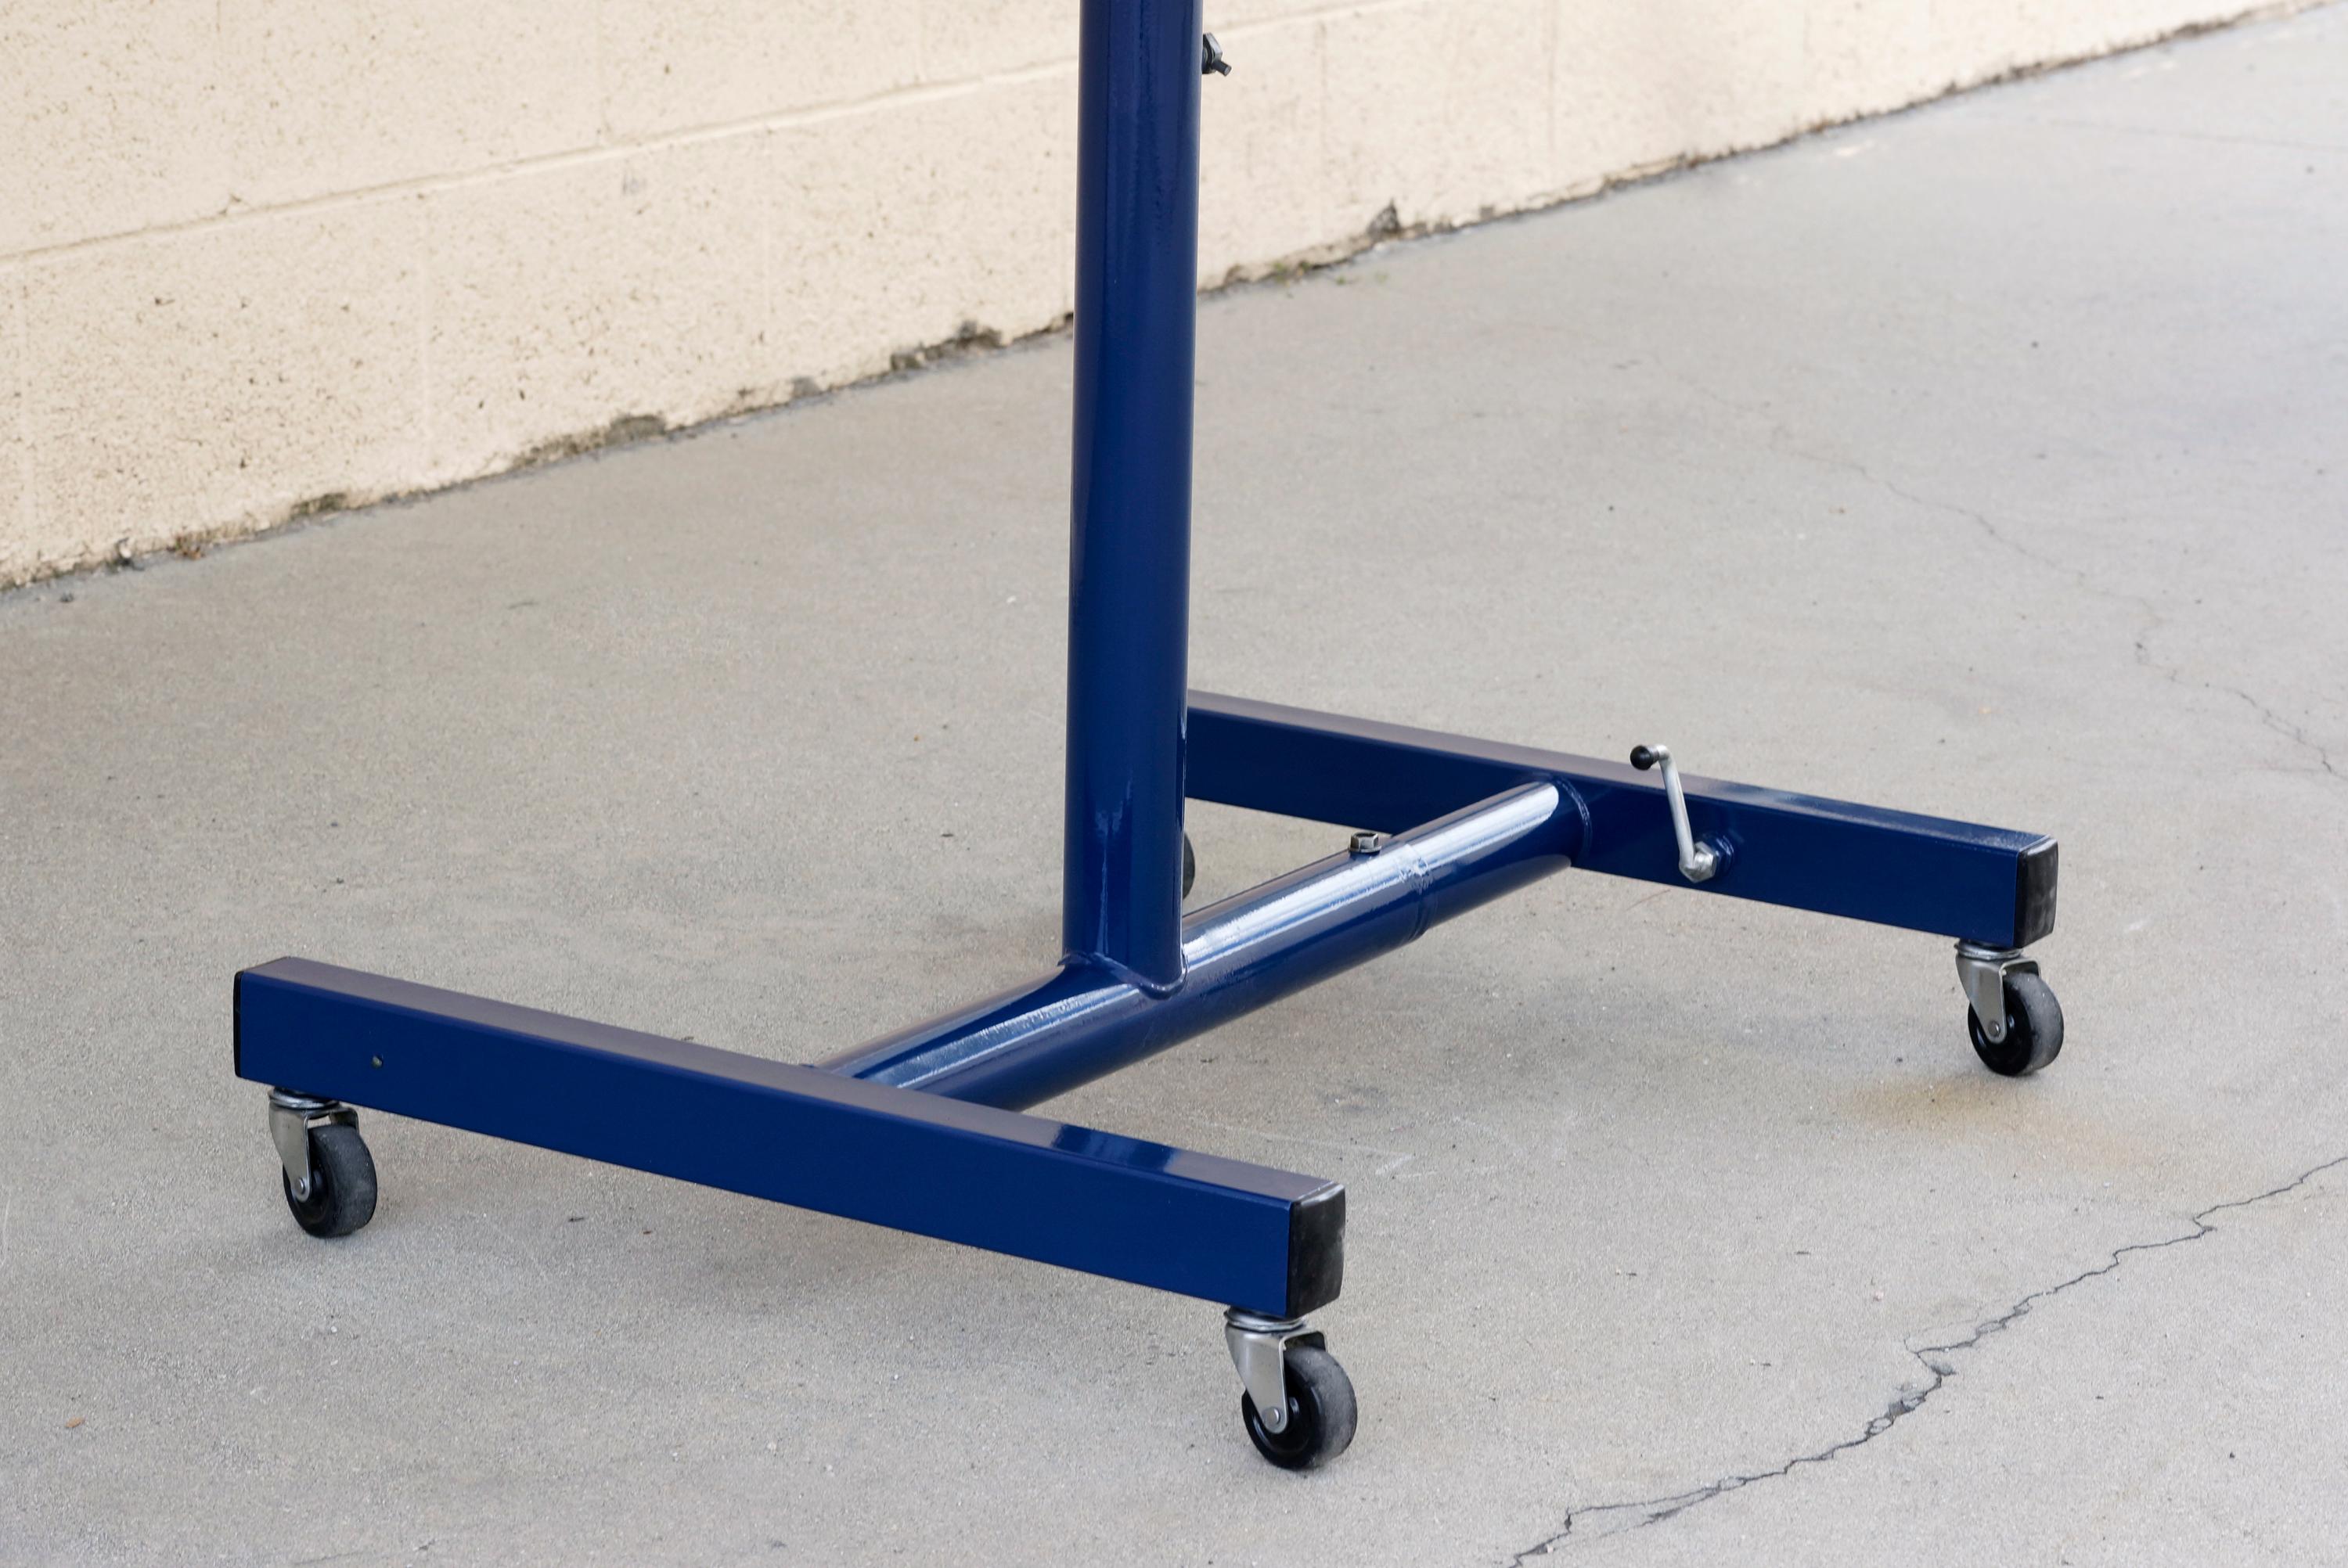 American Vintage Industrial Standing Desk, Refinished in Midnight Blue